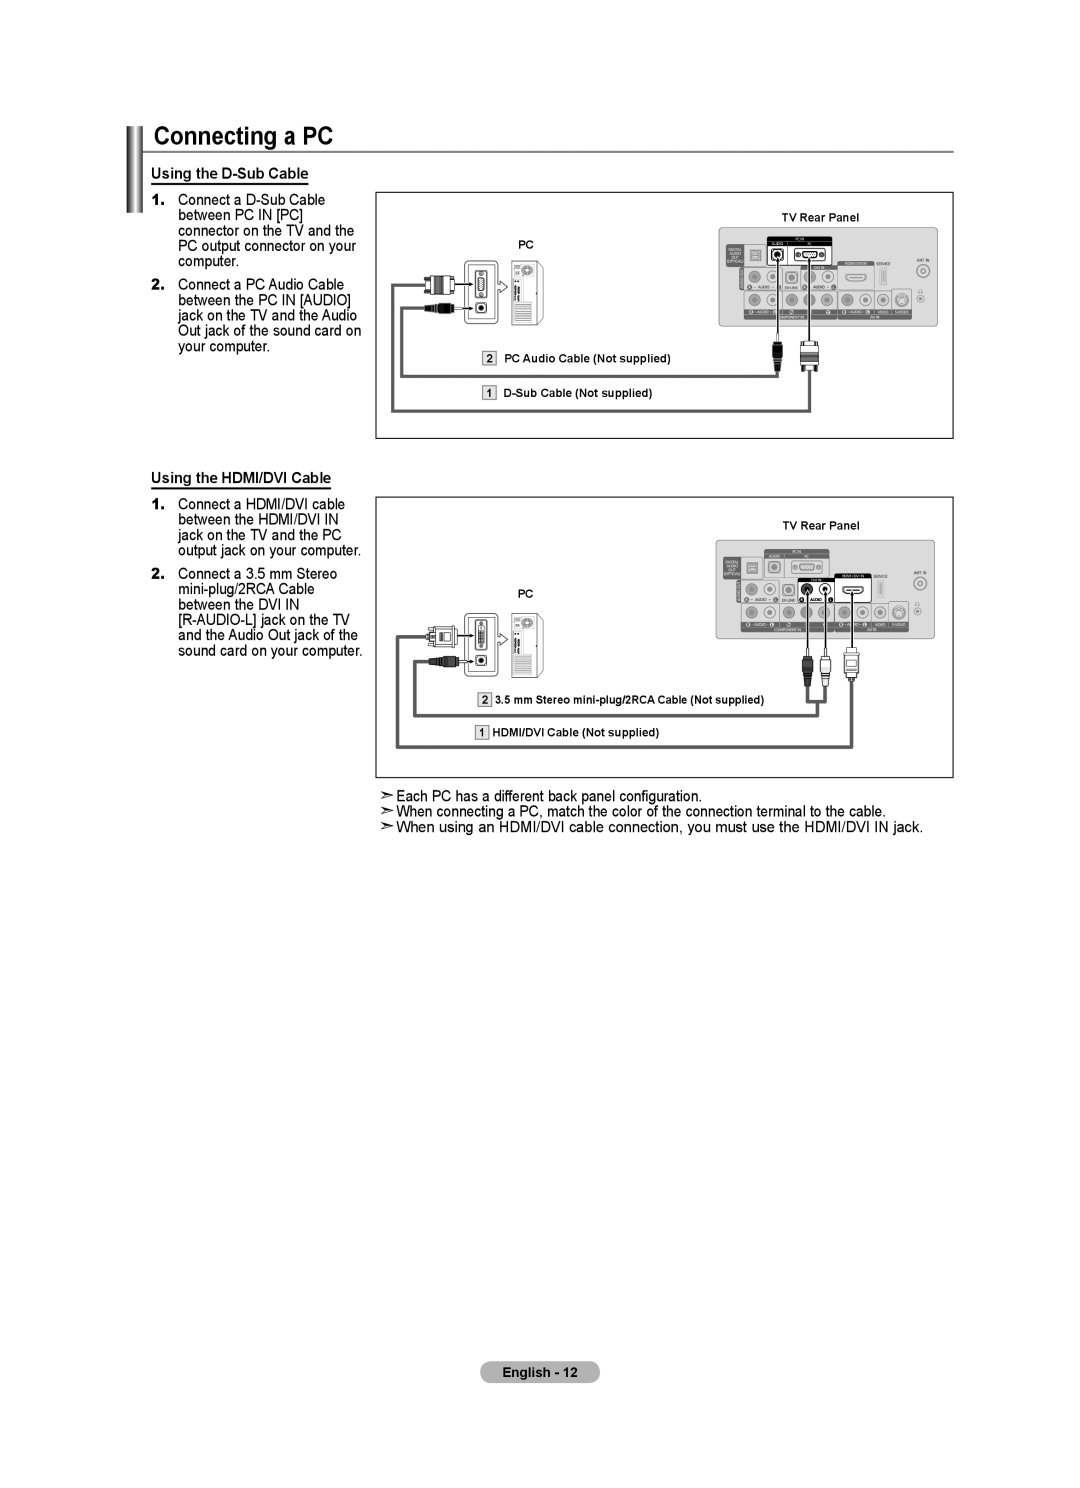 Samsung Series L3, LN22A330, LN22A0J1D user manual Connecting a PC, Using the D-Sub Cable, Using the HDMI/DVI Cable 